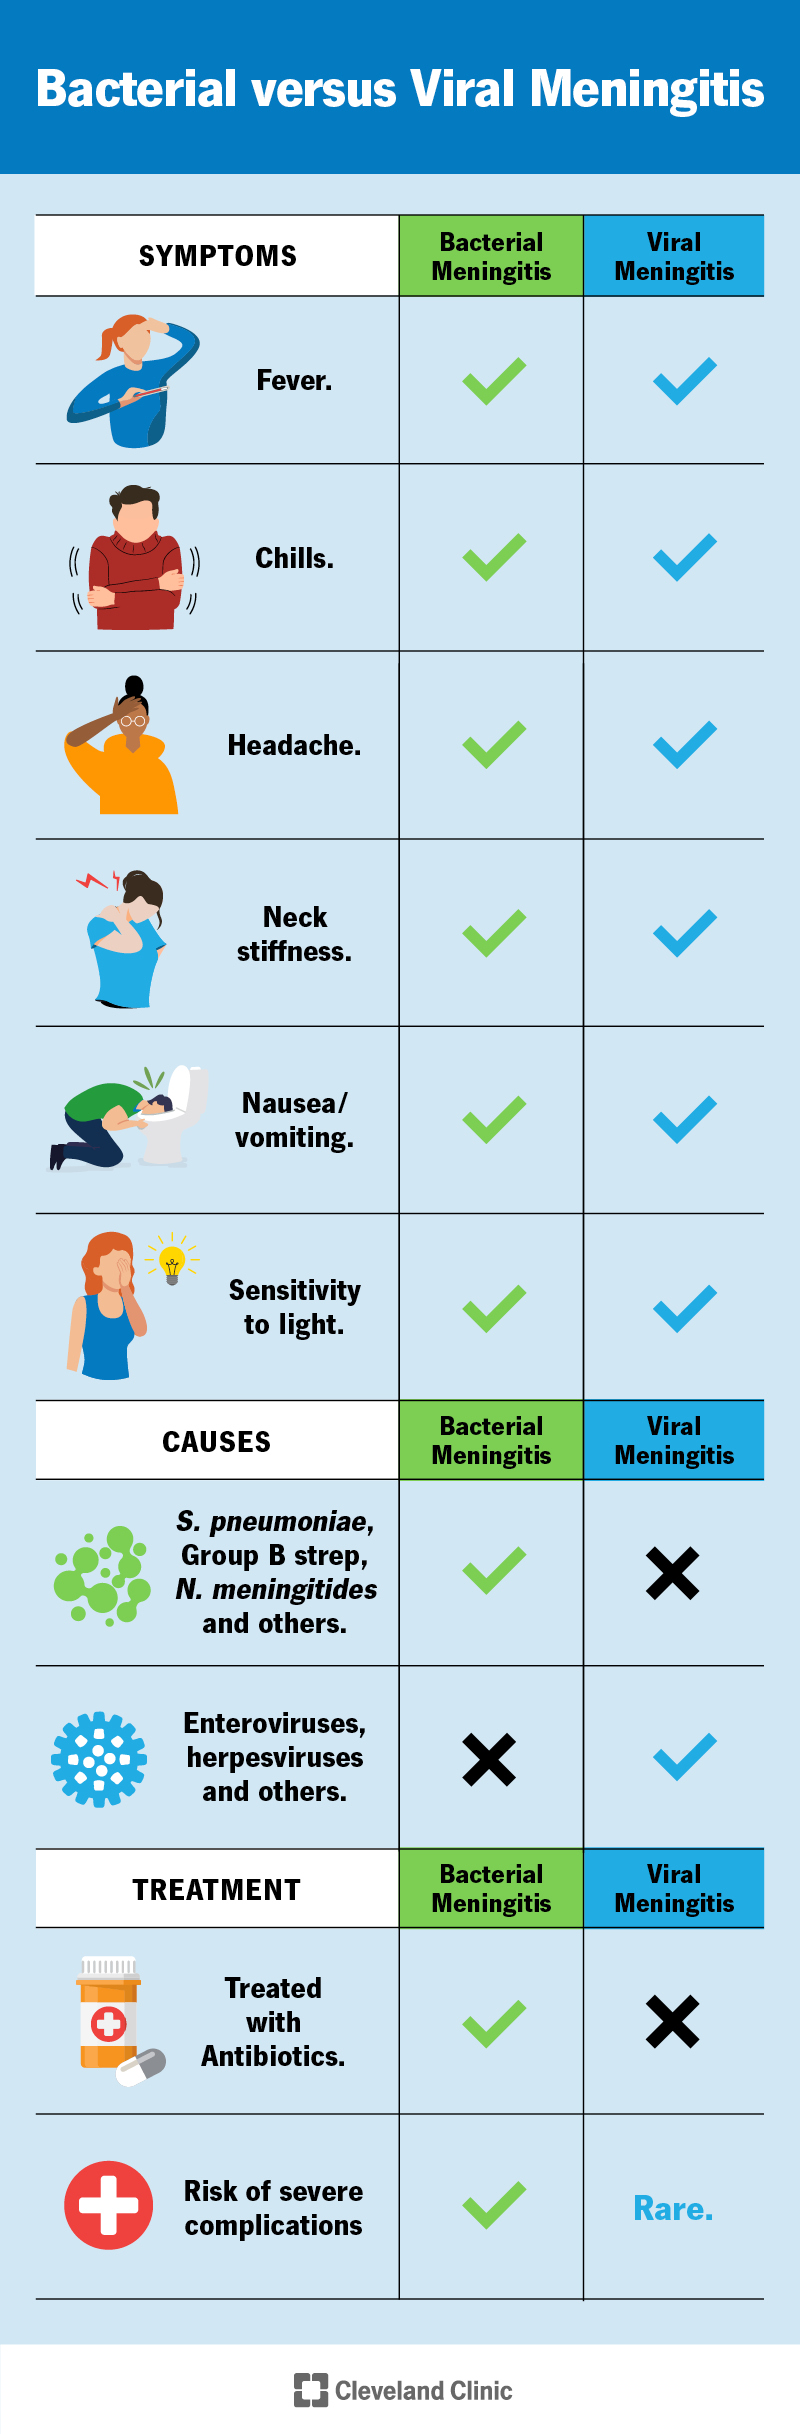 Viral and bacterial meningitis symptoms include fever, chills, headache, neck stiffness, nausea and sensitivity to light.